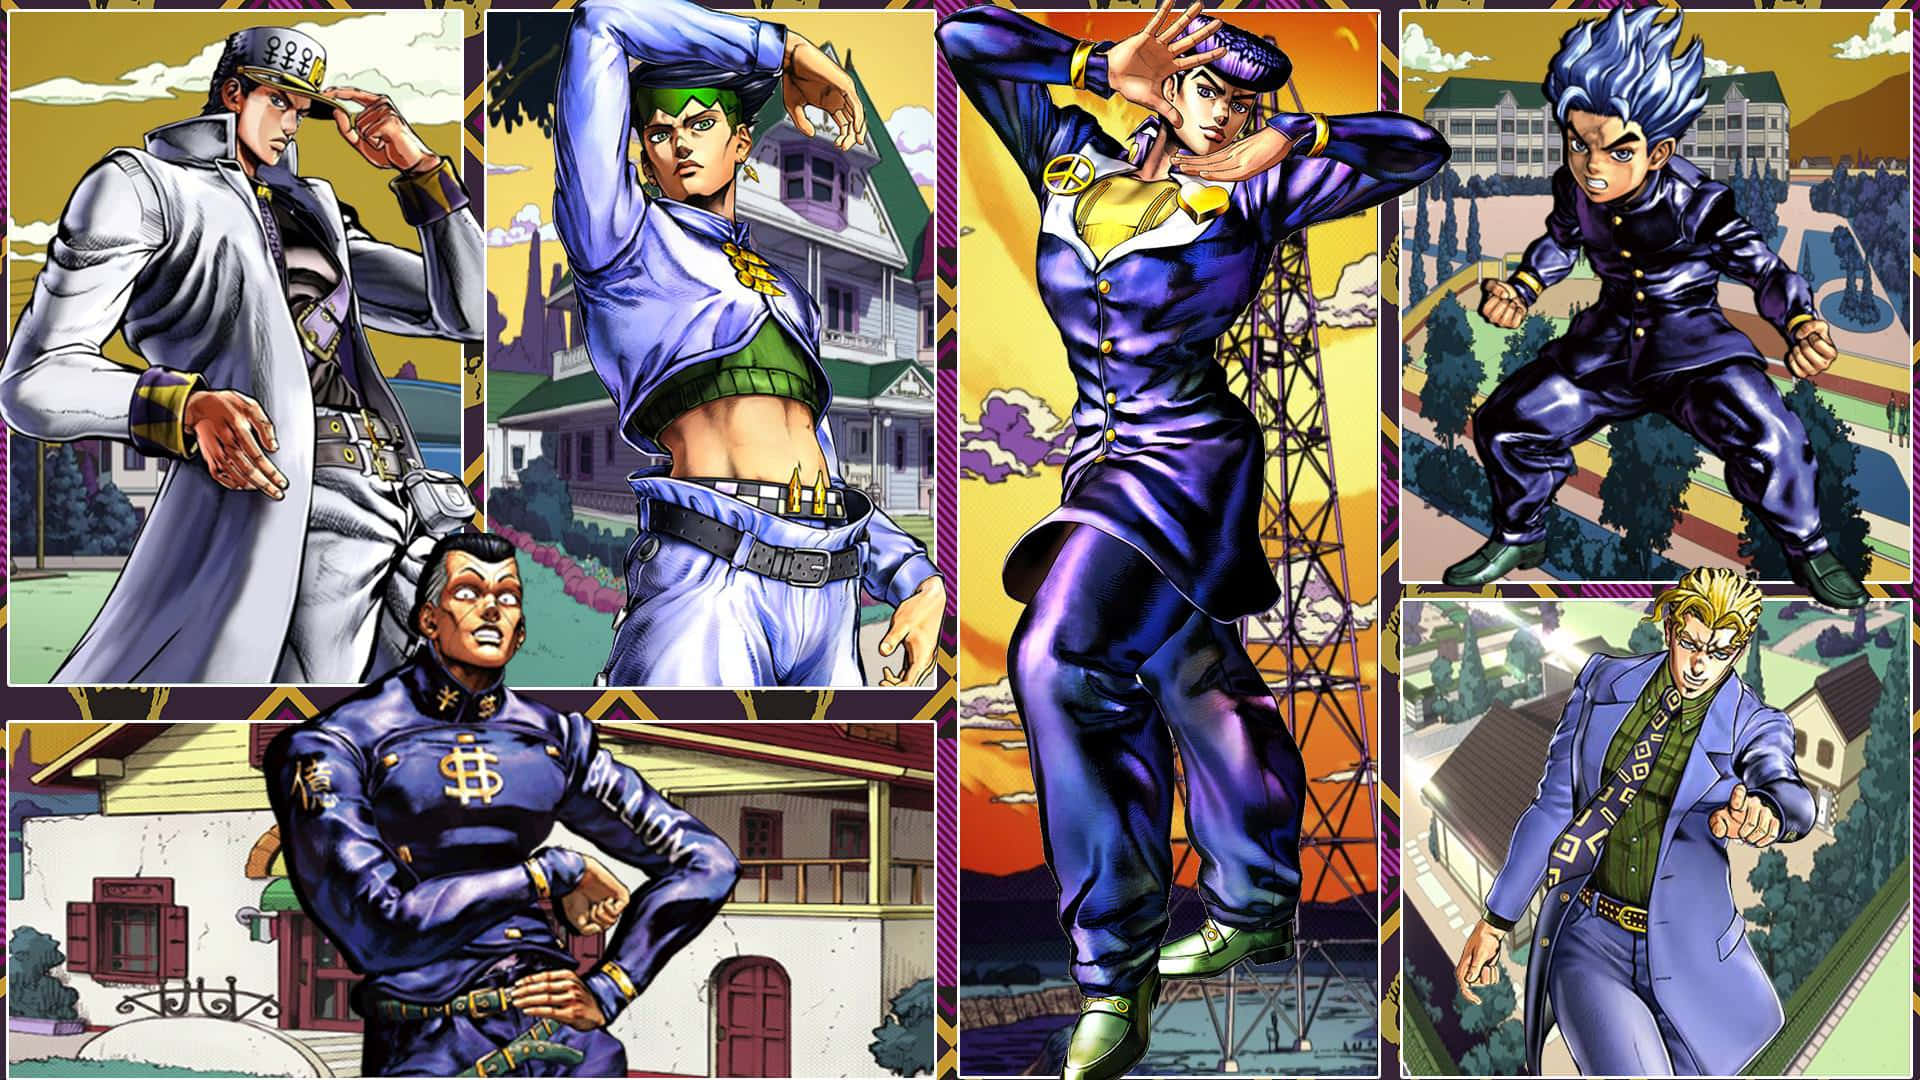 Astral Projection of Jotaro Kujo